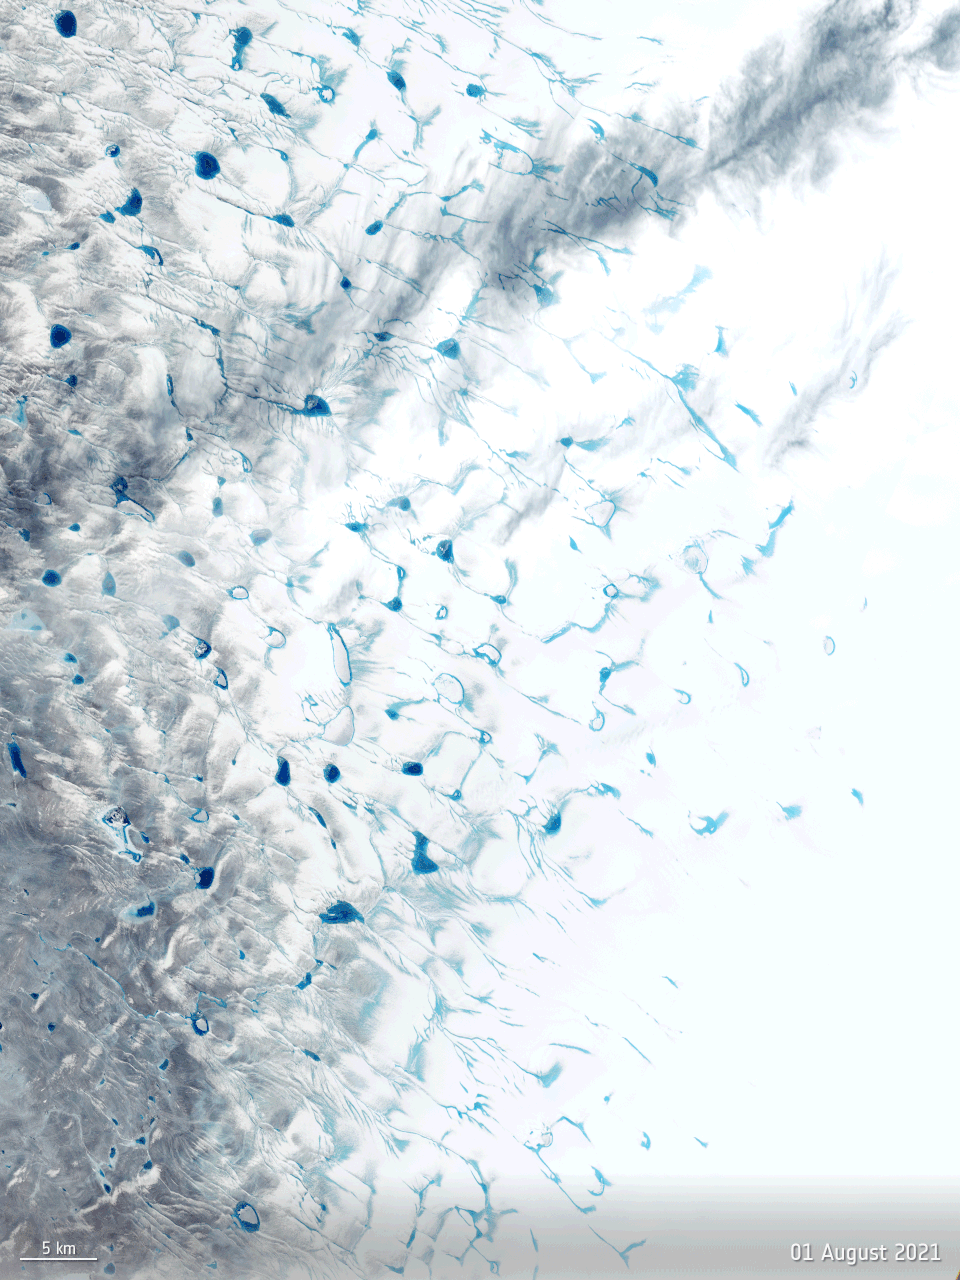 Meltwater and surface lakes on the Greenland ice sheet 